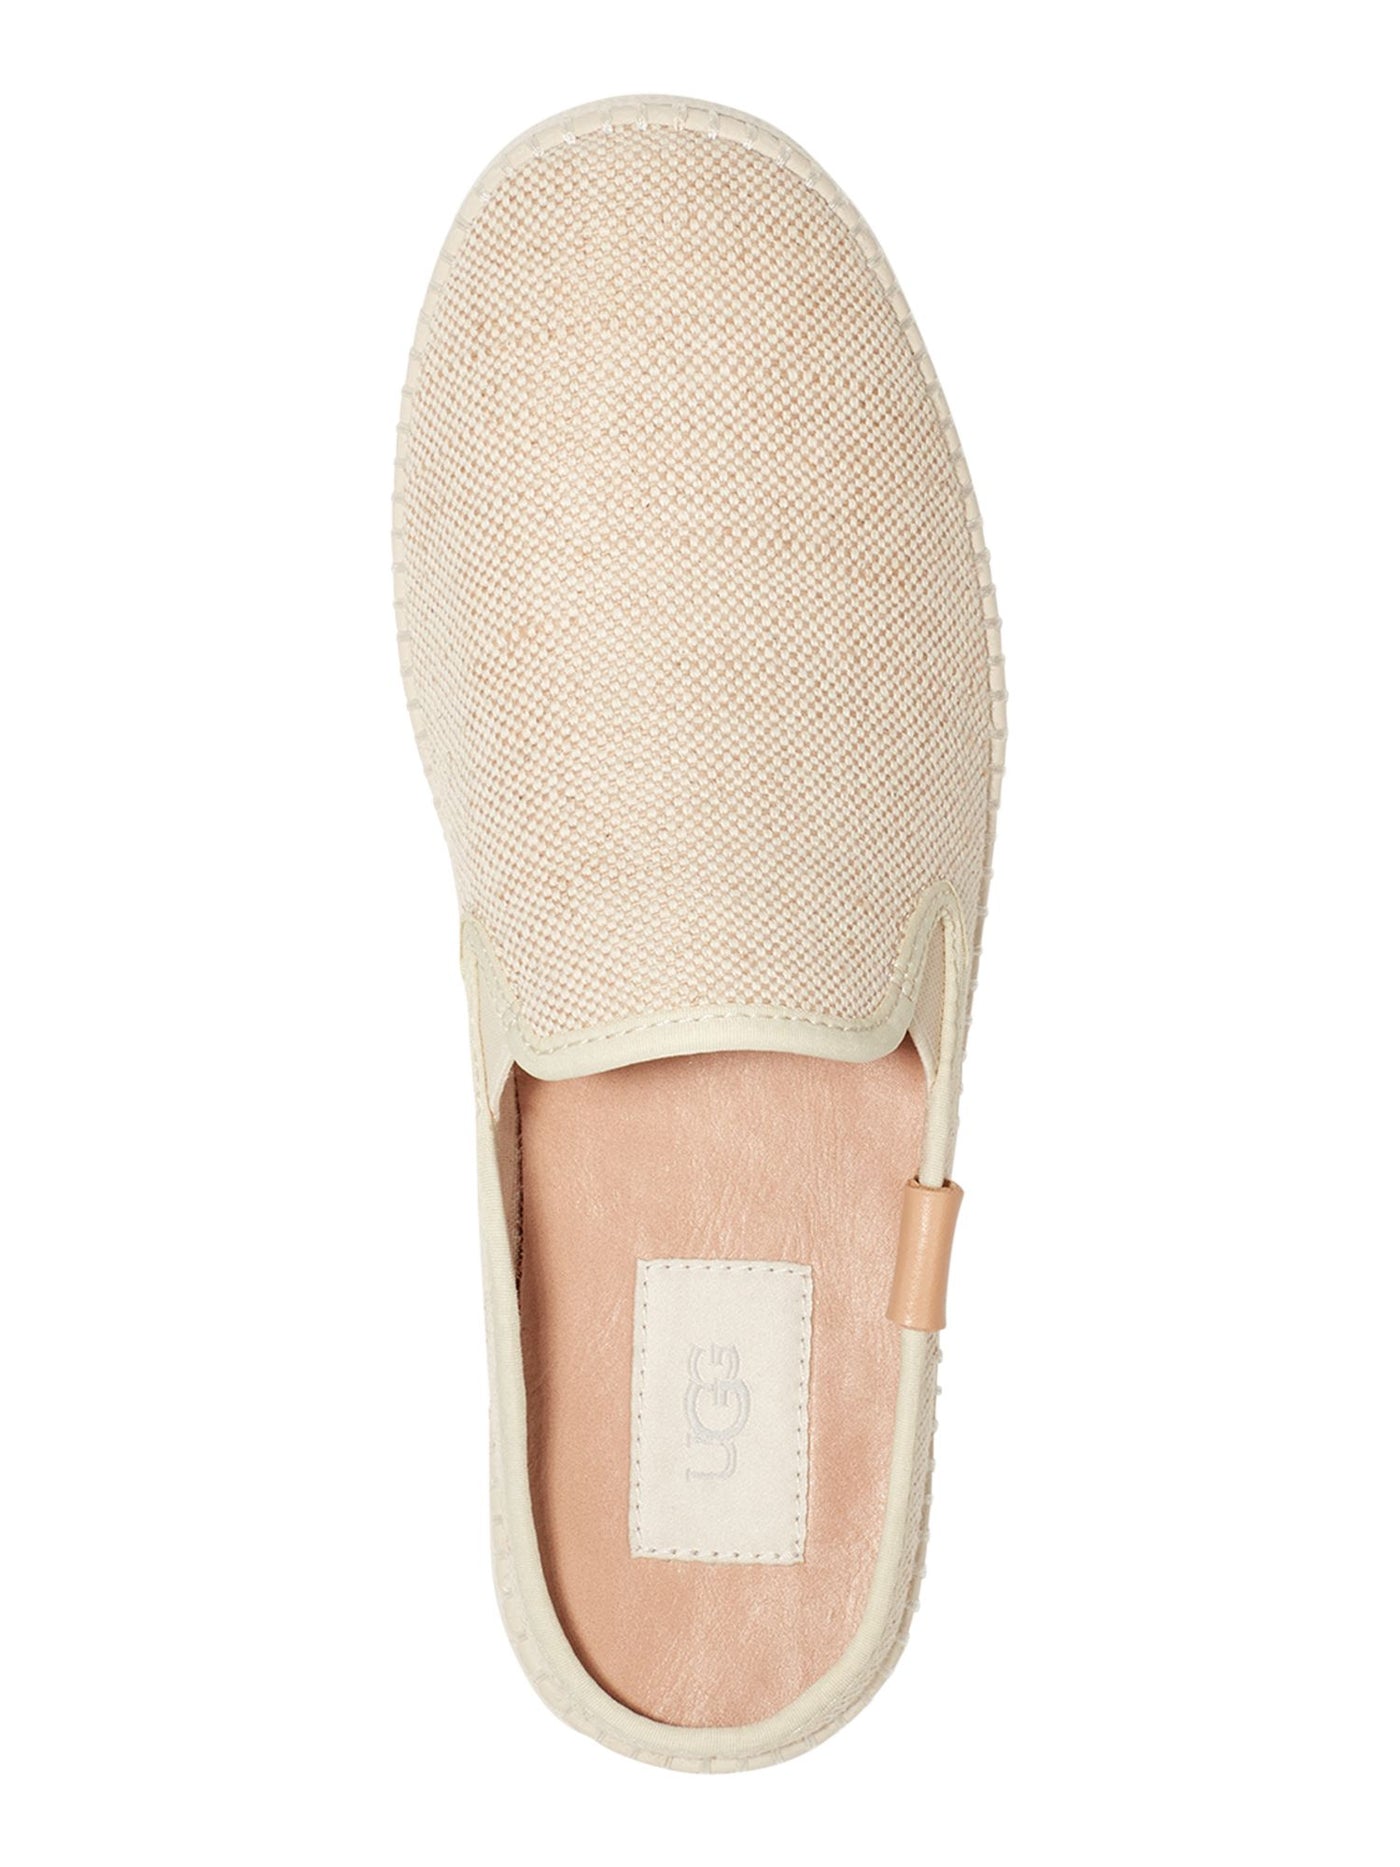 UGG Womens Beige Woven Goring Removable Insole Cushioned Delu Round Toe Platform Slip On Mules 8